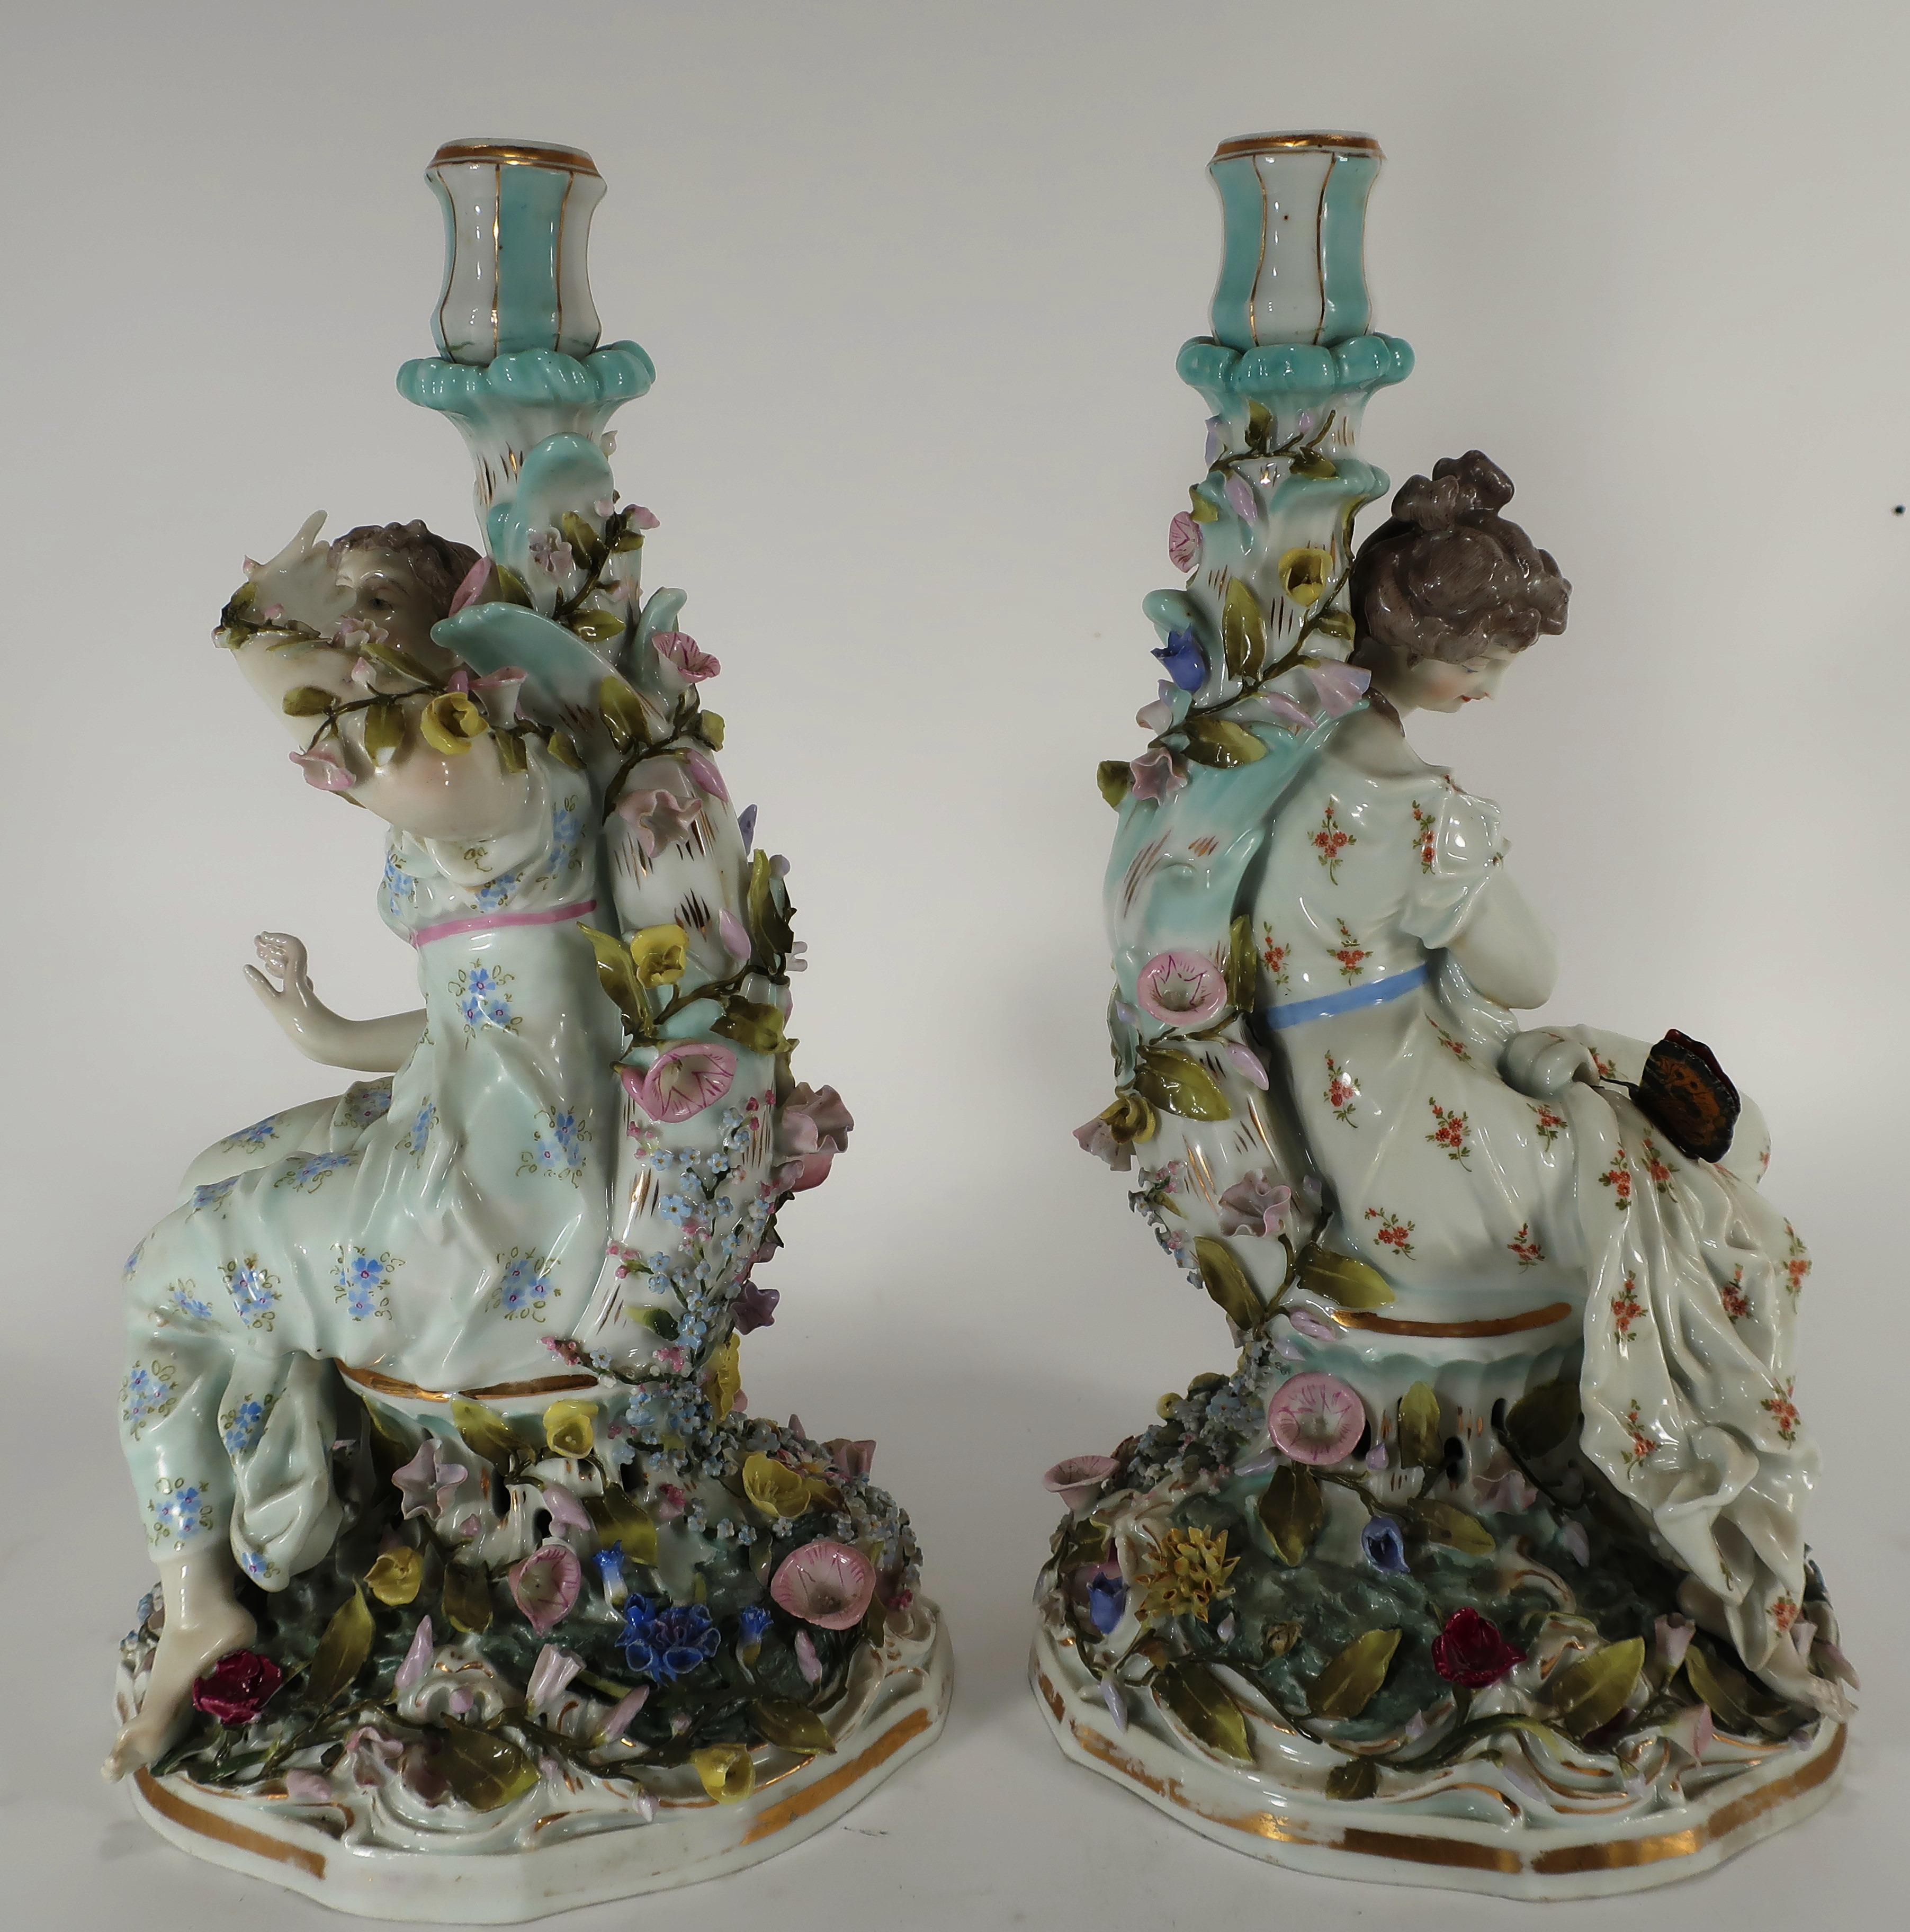 Pair of porcelain female figural candelabra, bears Meissen Mark. Removable candelabra one with four arms and the other with six arms. From the Cascone collection of Arts and Antiques.